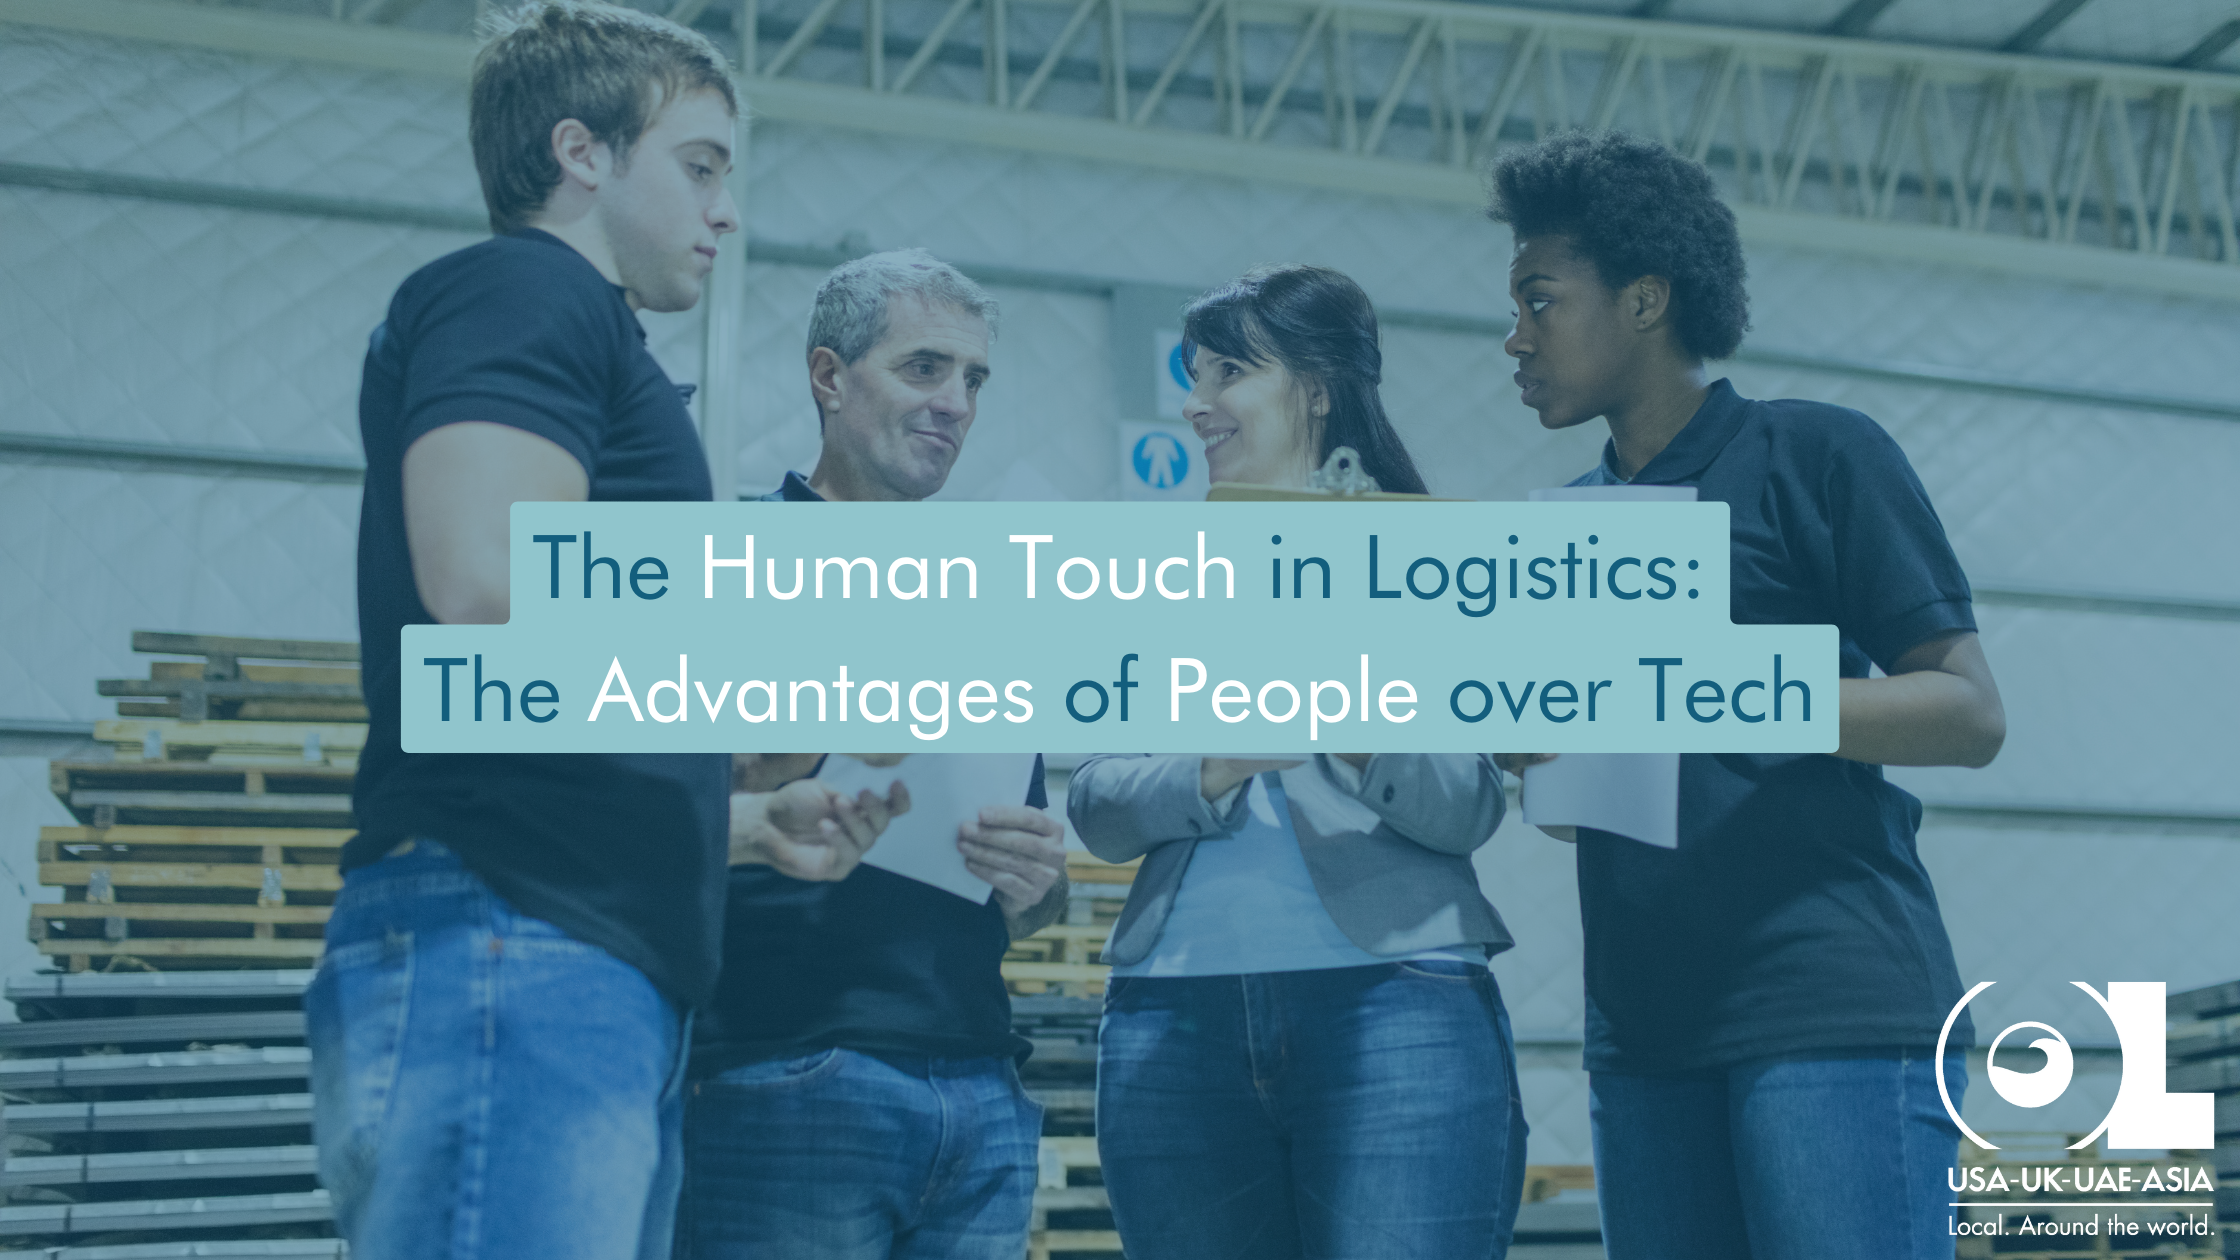 The-Human-Touch-in-Logistics-Advantages-of-People-over-Tech-OL-USA